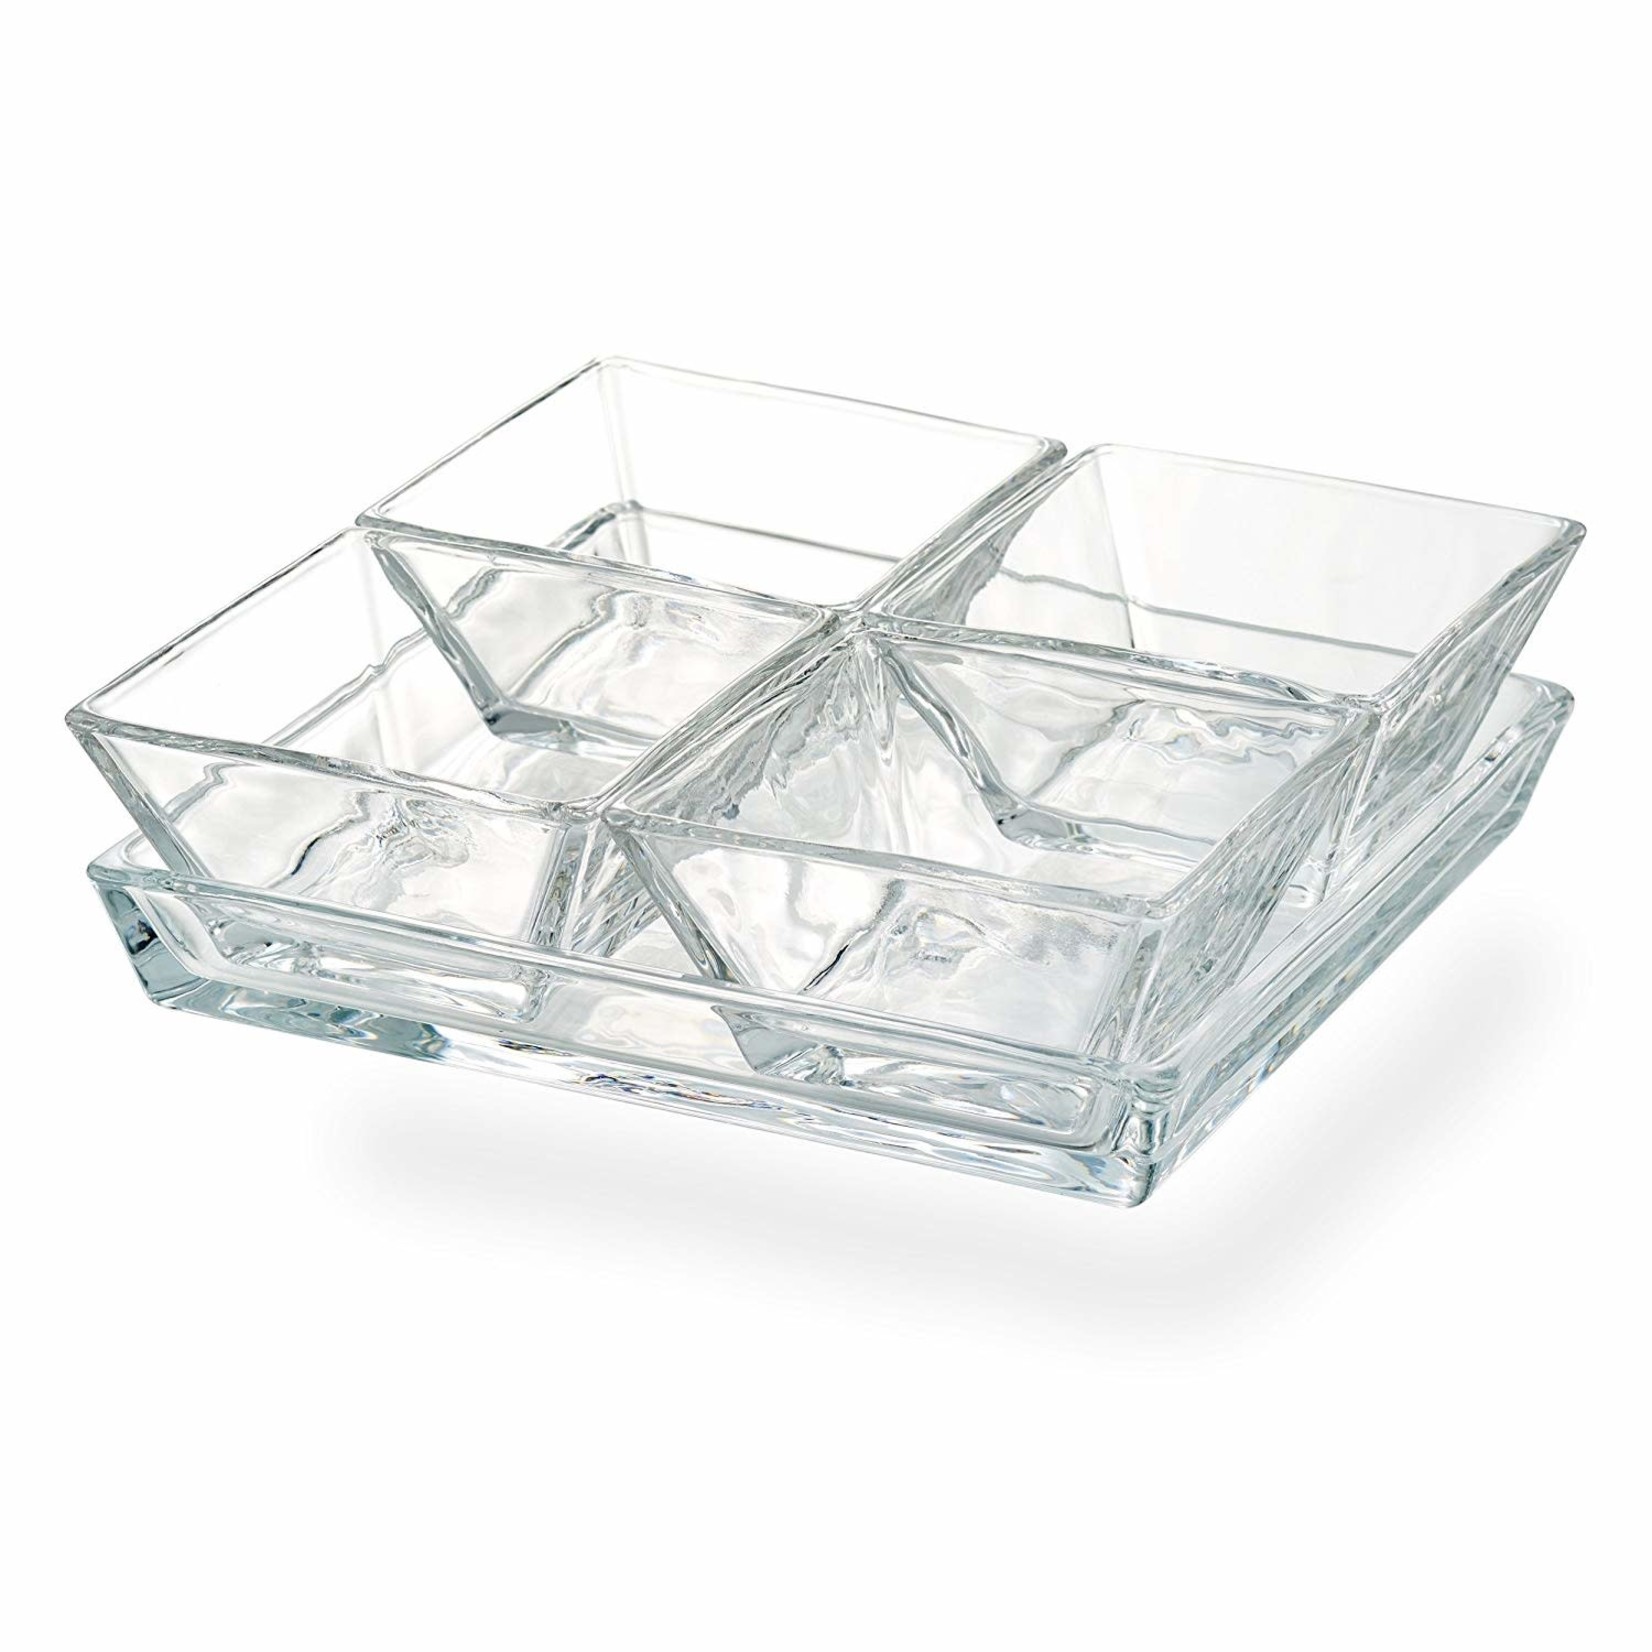 11917 Cortland 4-Section Glass Serving Tray